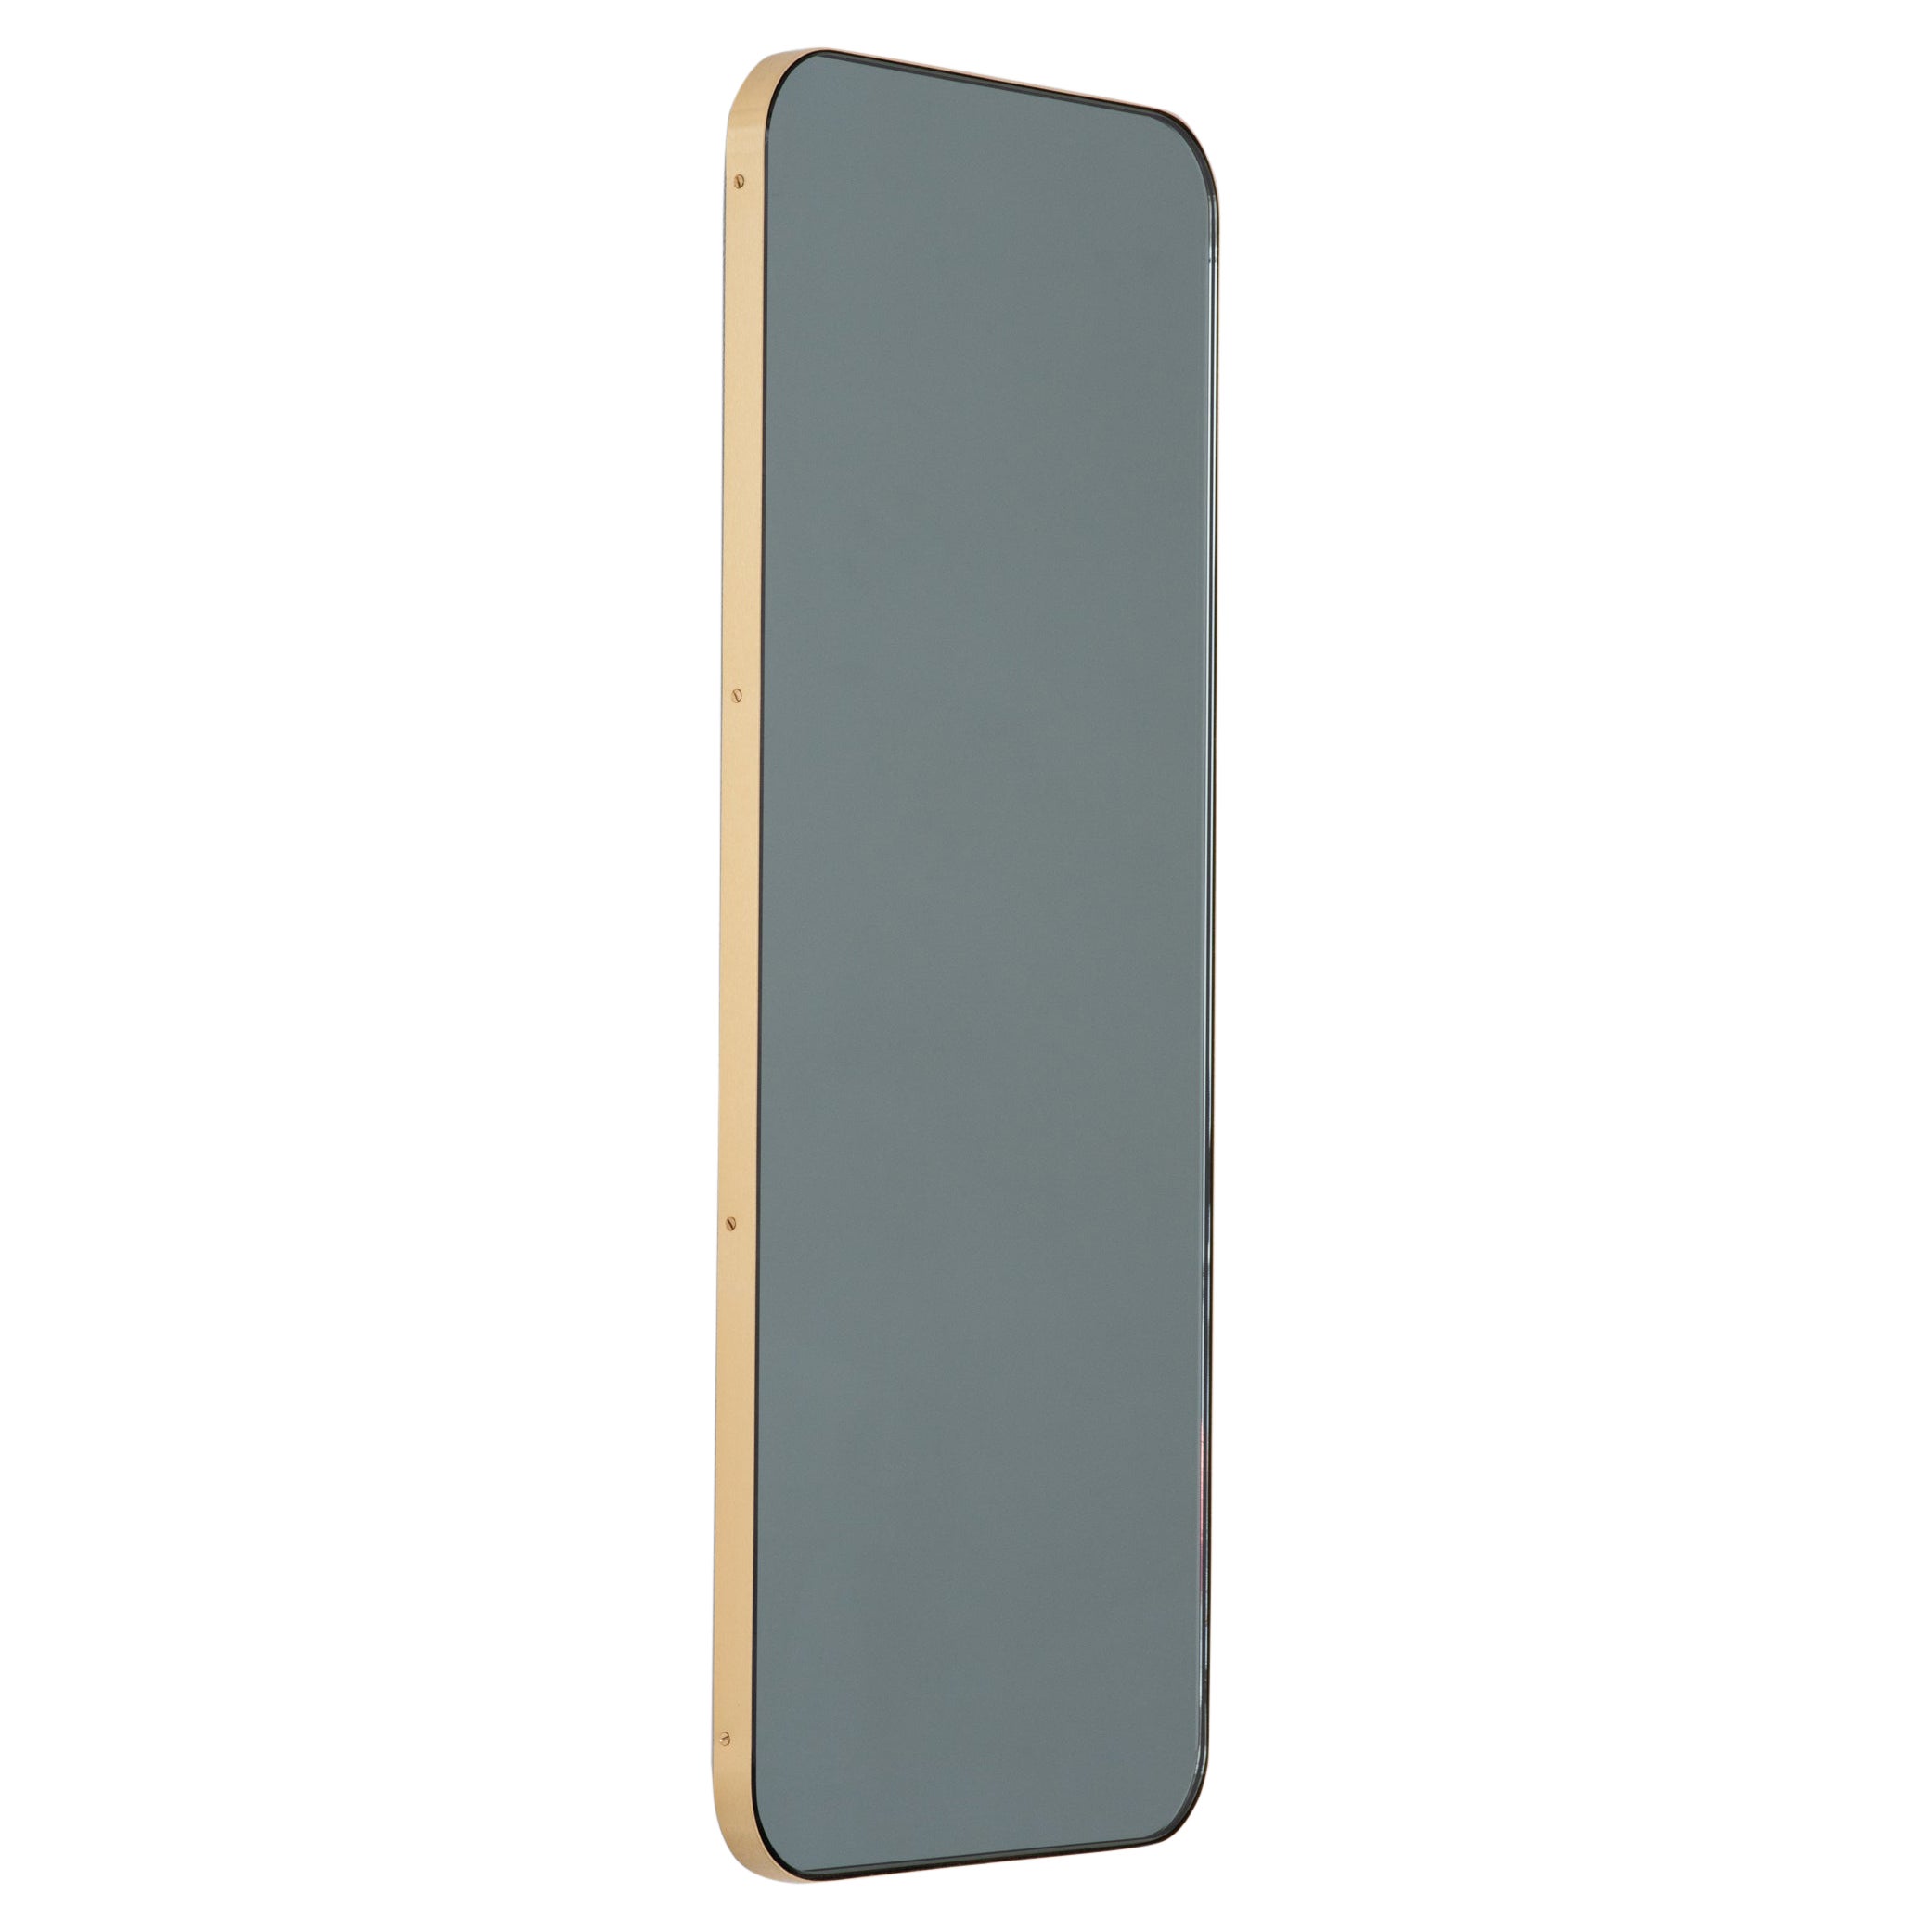 Quadris Rectangular Black Tinted Contemporary Mirror with Brass Frame, XL For Sale